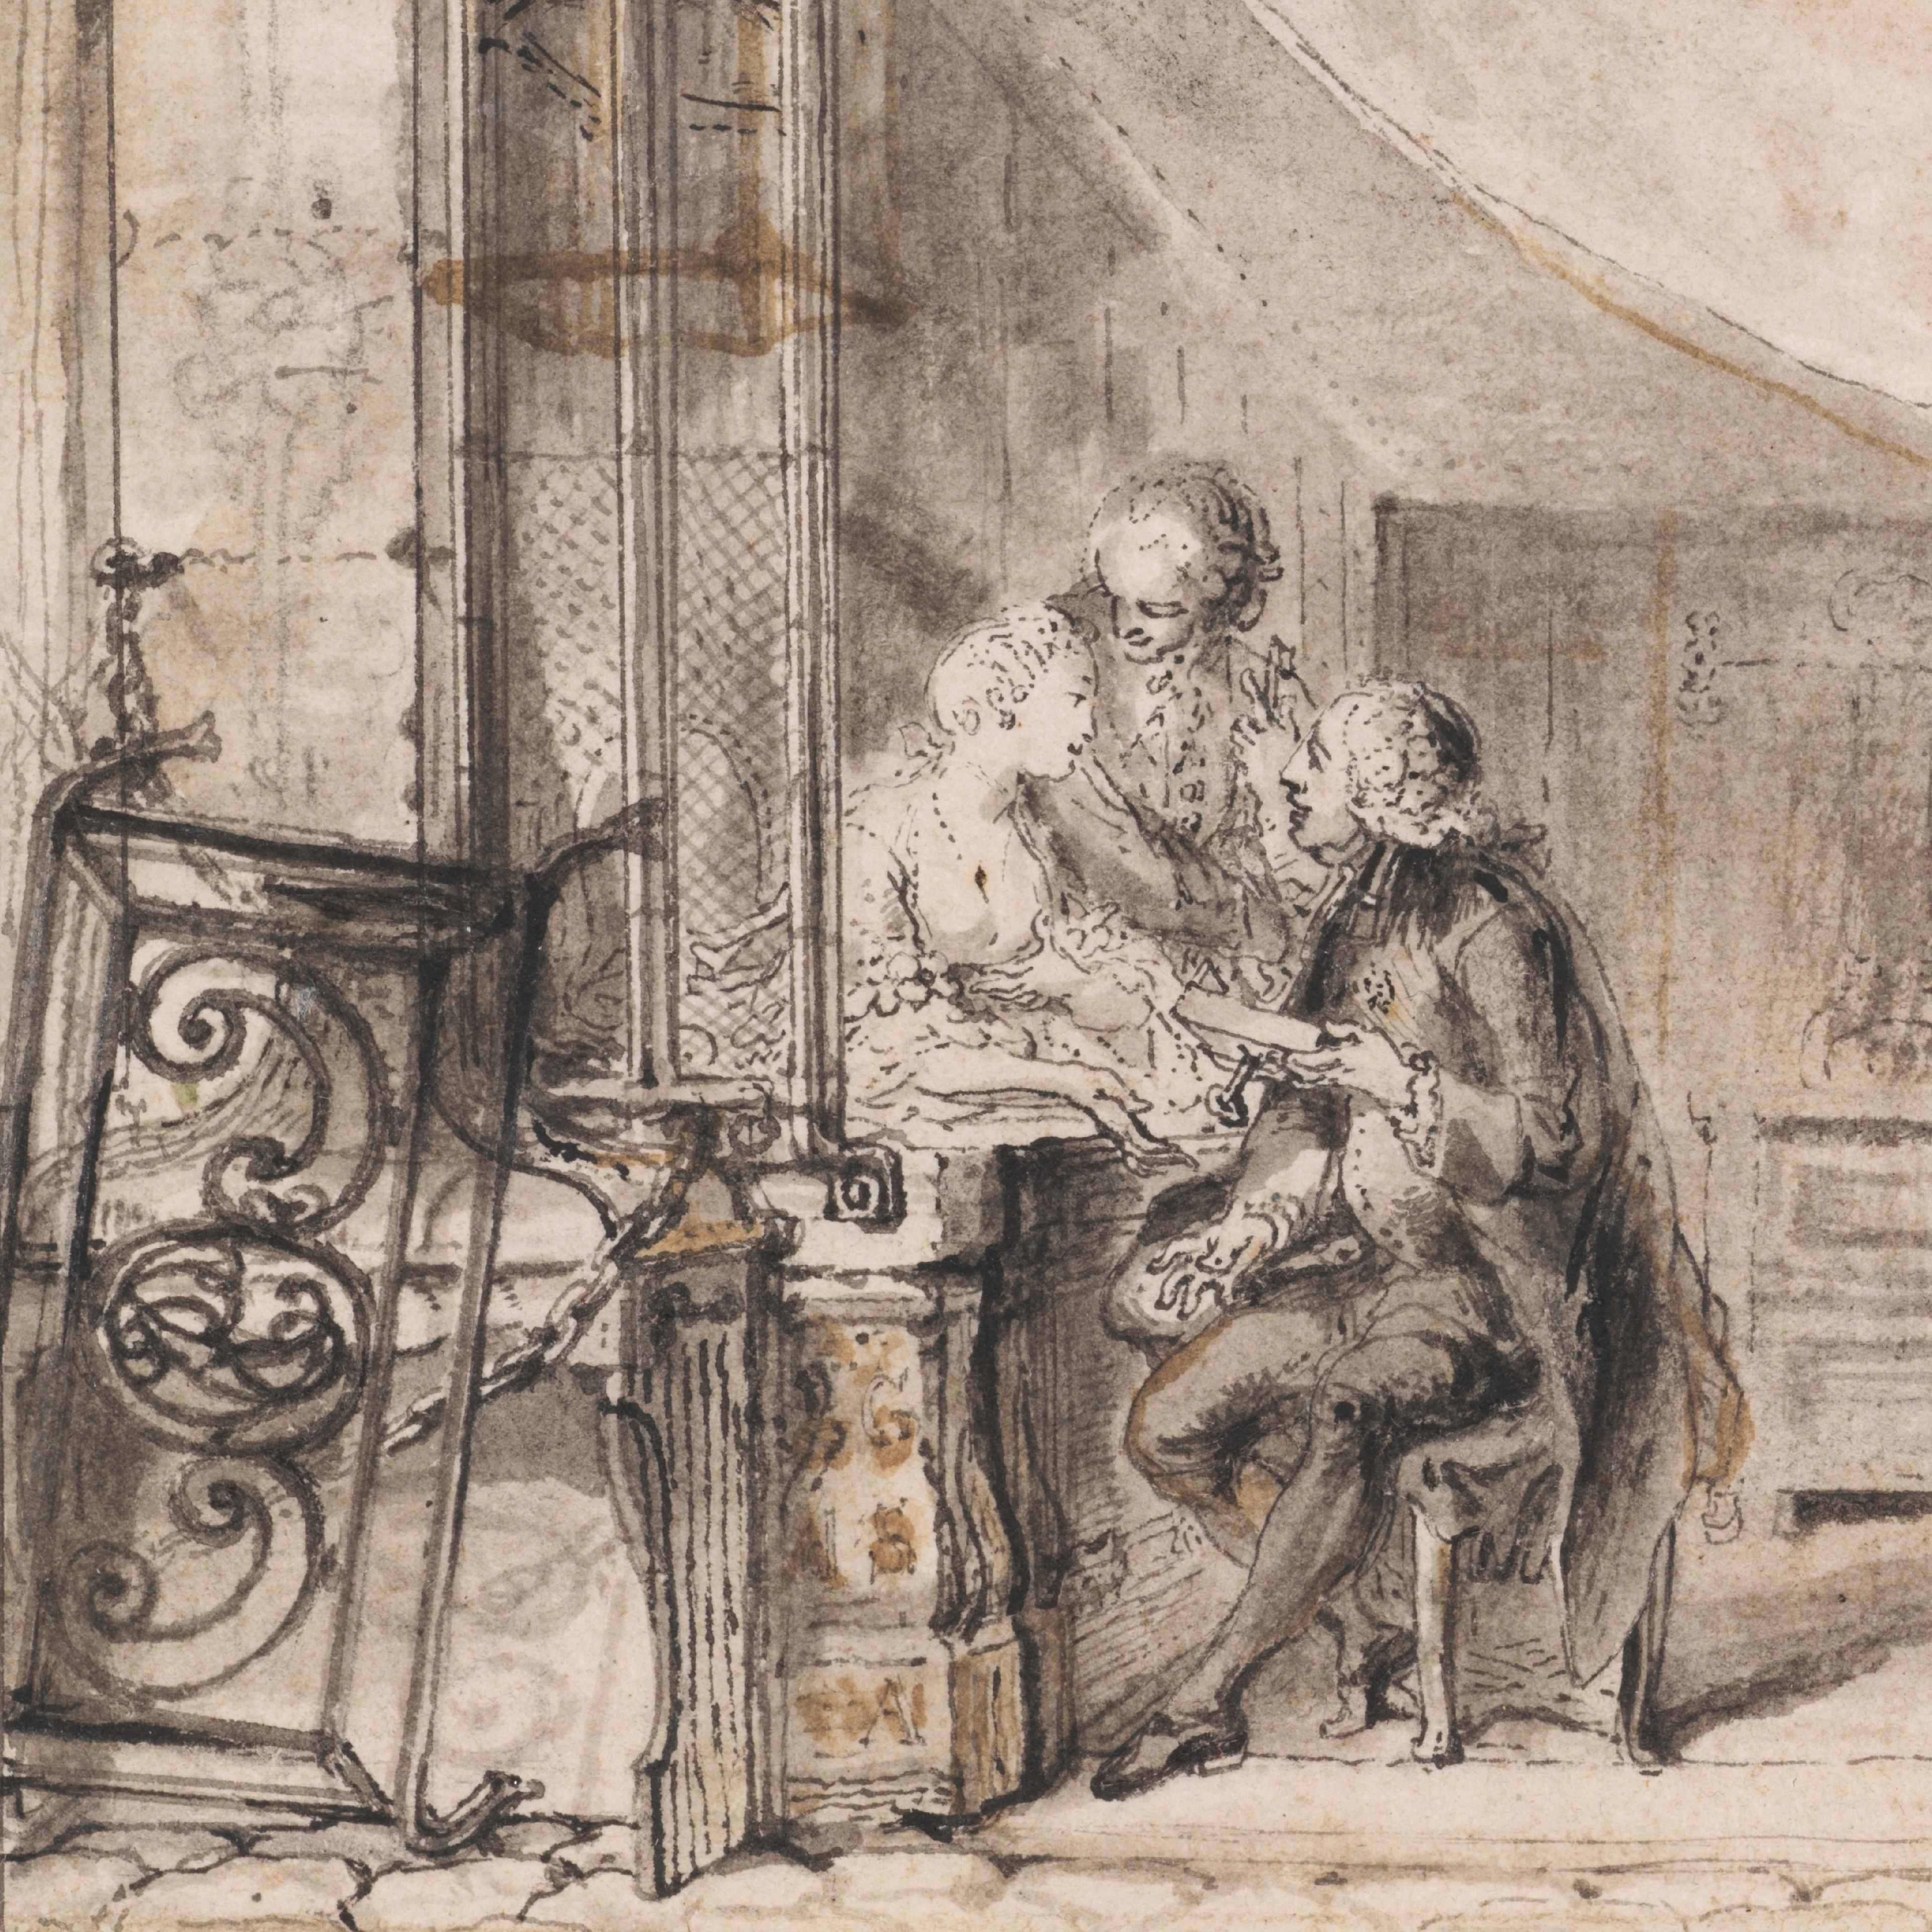 Two men and one woman in period clothing gather around a table, with the men attentively looking at the woman. The setting appears to be indoors, with ornate furnishings and a delicately drawn background.